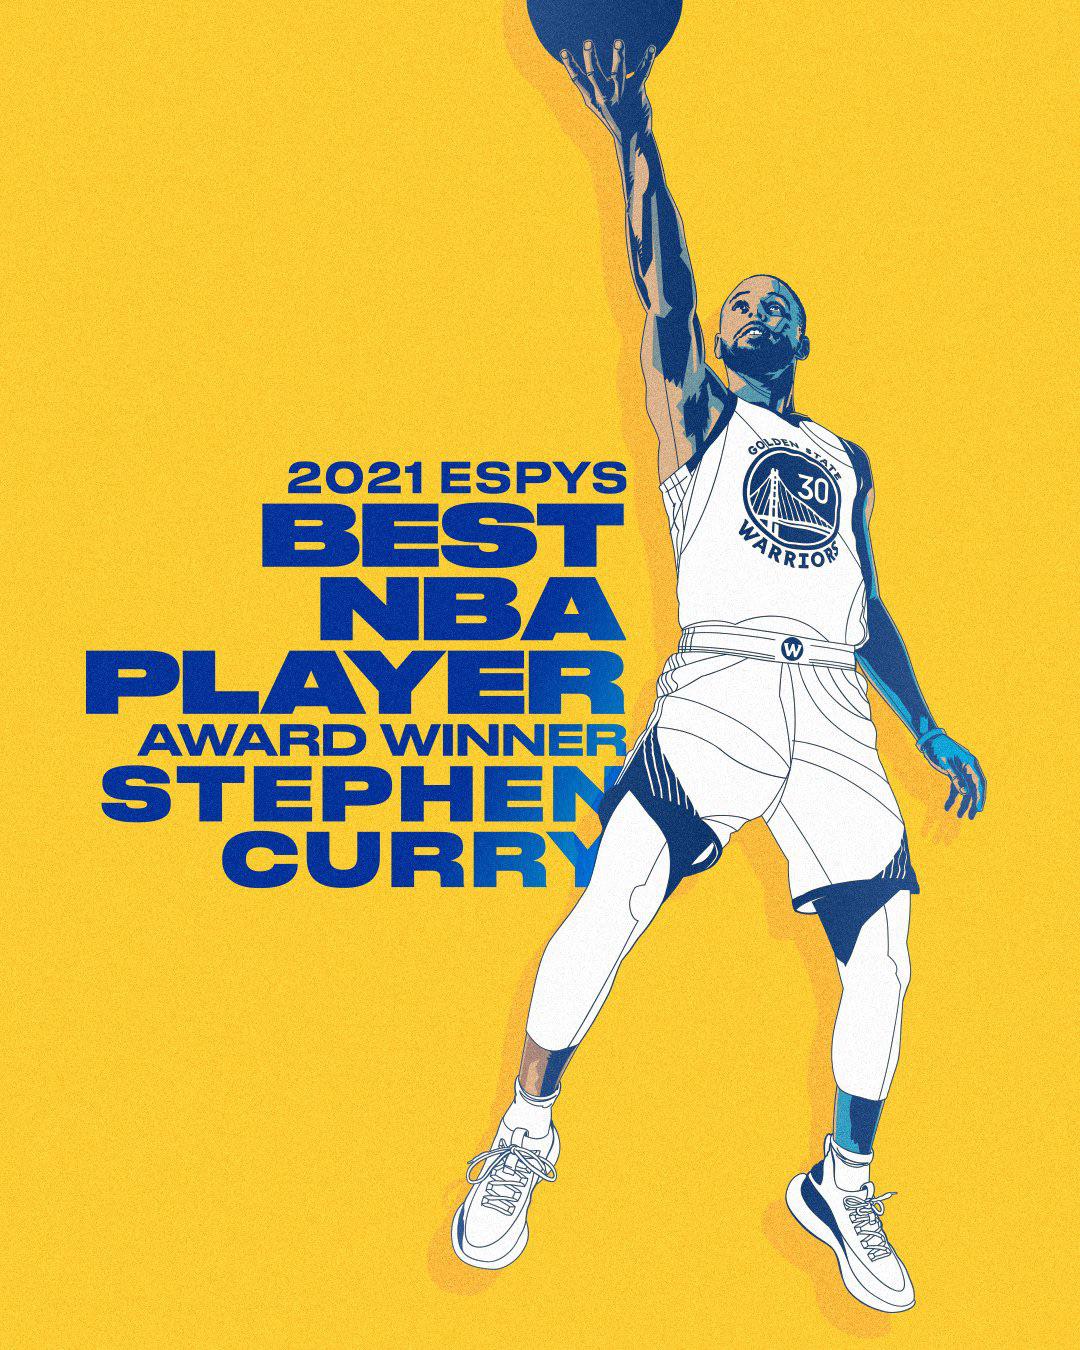 Golden State Warriors Twitter fans have spoken. For the second time in his career, has won the ESPY for “Best NBA Player”